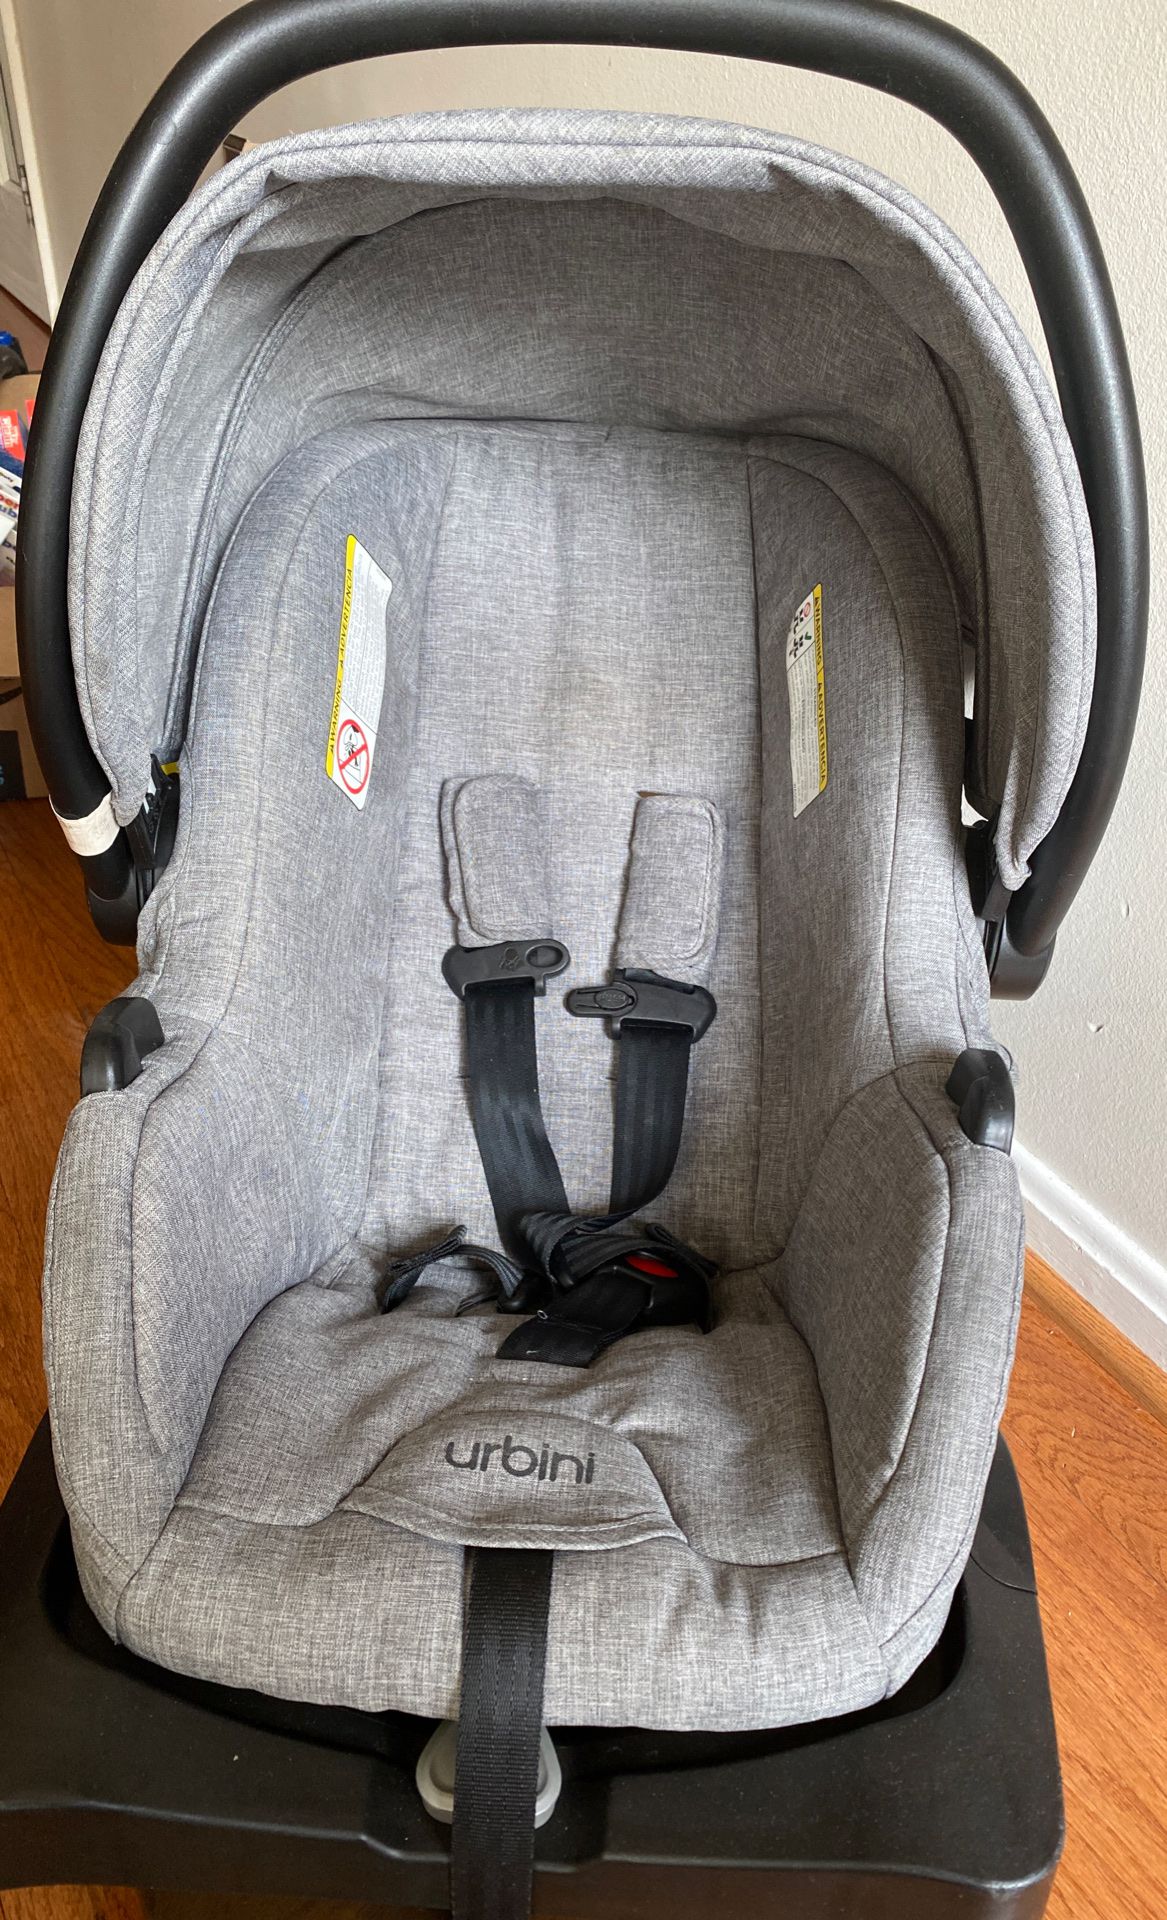 Urbini car seat for infant 0-8 months